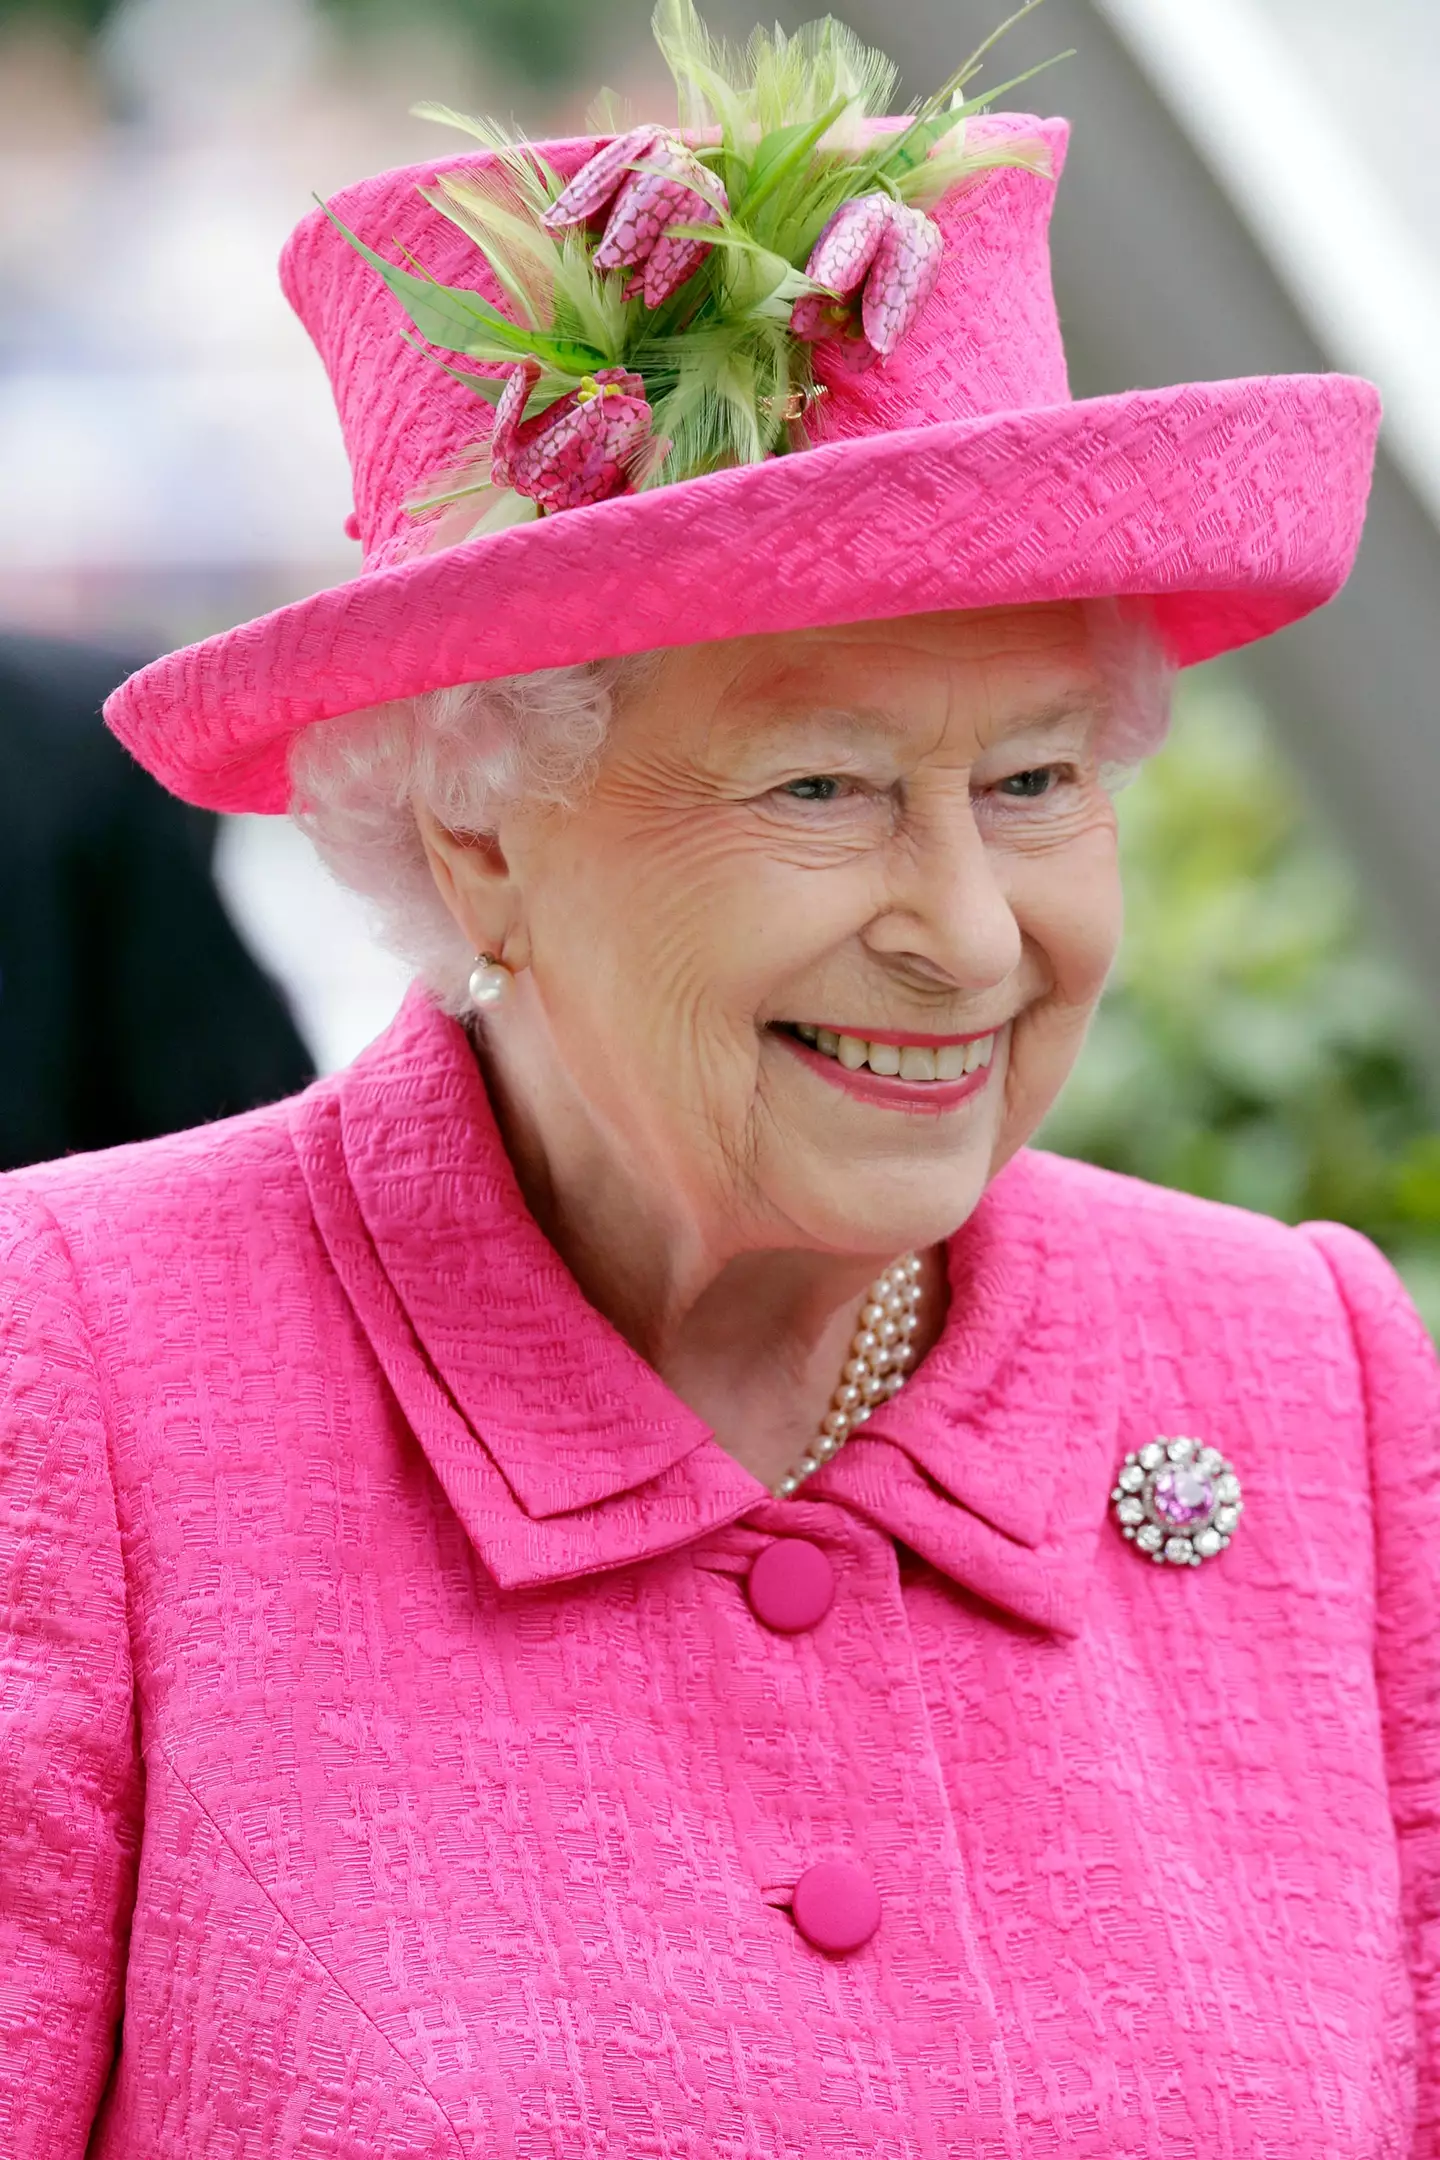 Queen Elizabeth’s cocktail was once spiked with amphetamines, a former Member of Parliament alleged.